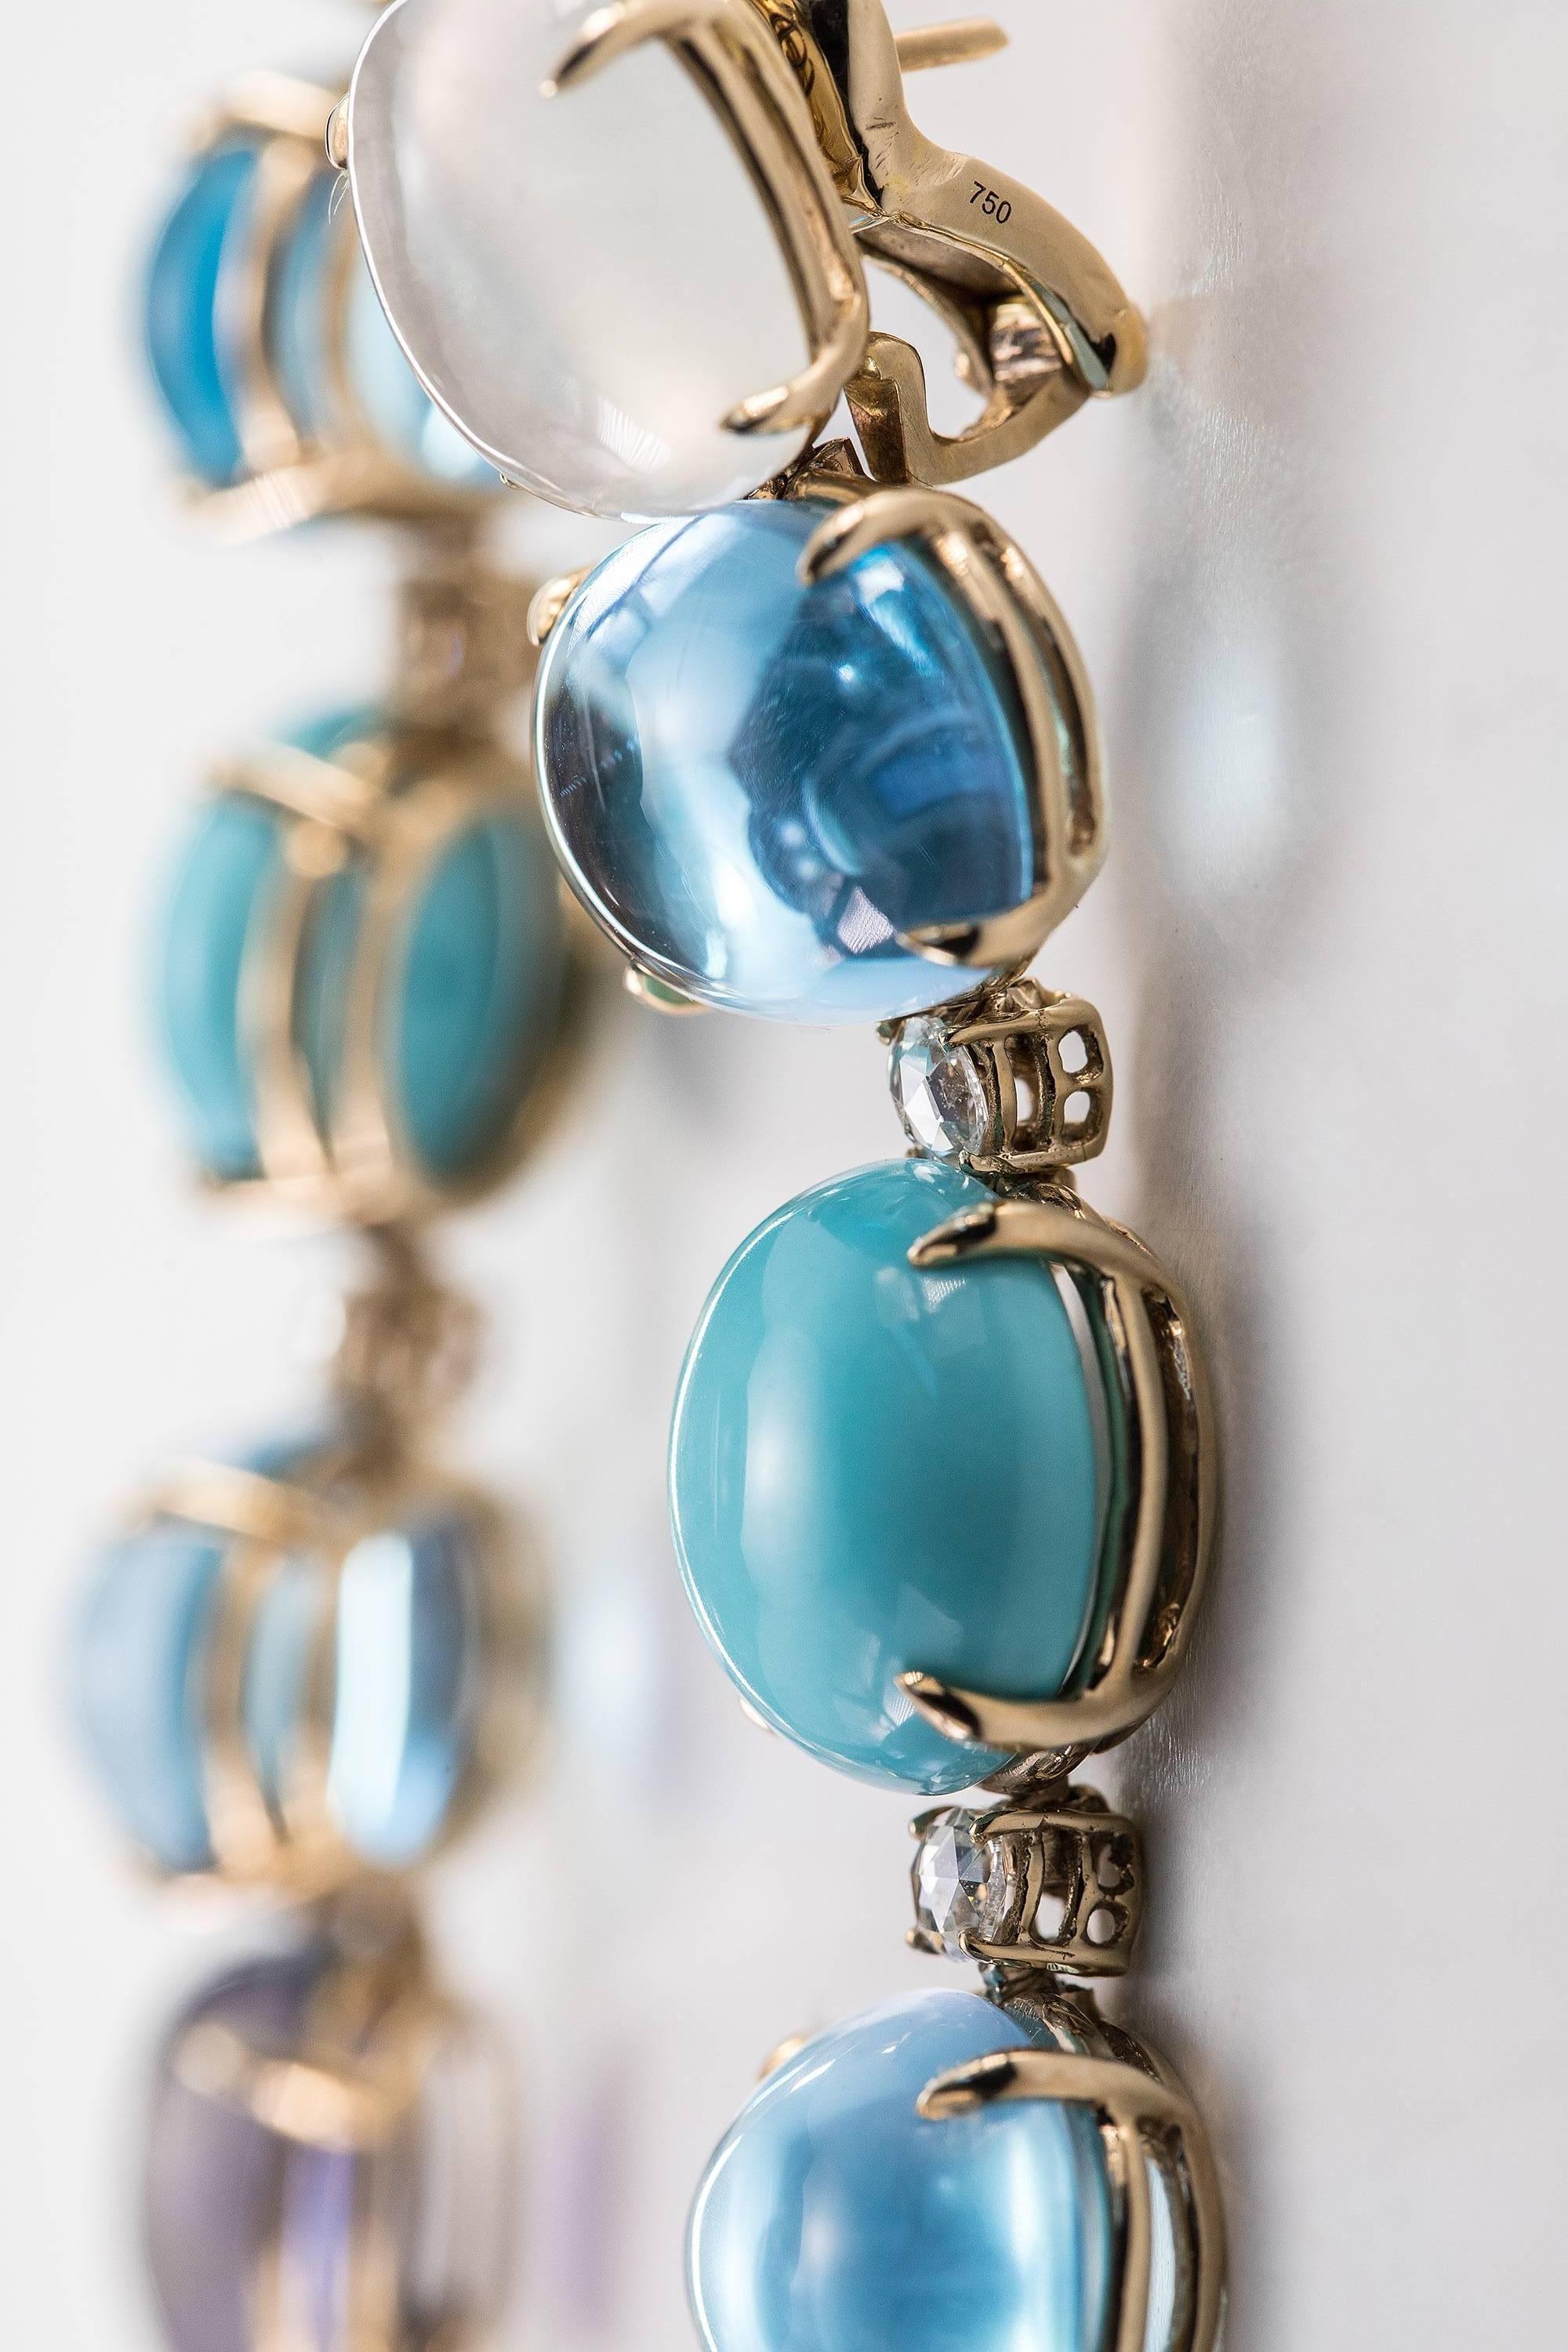 The Earrings are One of a Kind, designed by Lygia Demades as a Blue Rainbow in a flexible hand made 18kt gold setting in Sand color specifically created to enhance the color of the stones and look subtle and elegant when worn next to the skin.